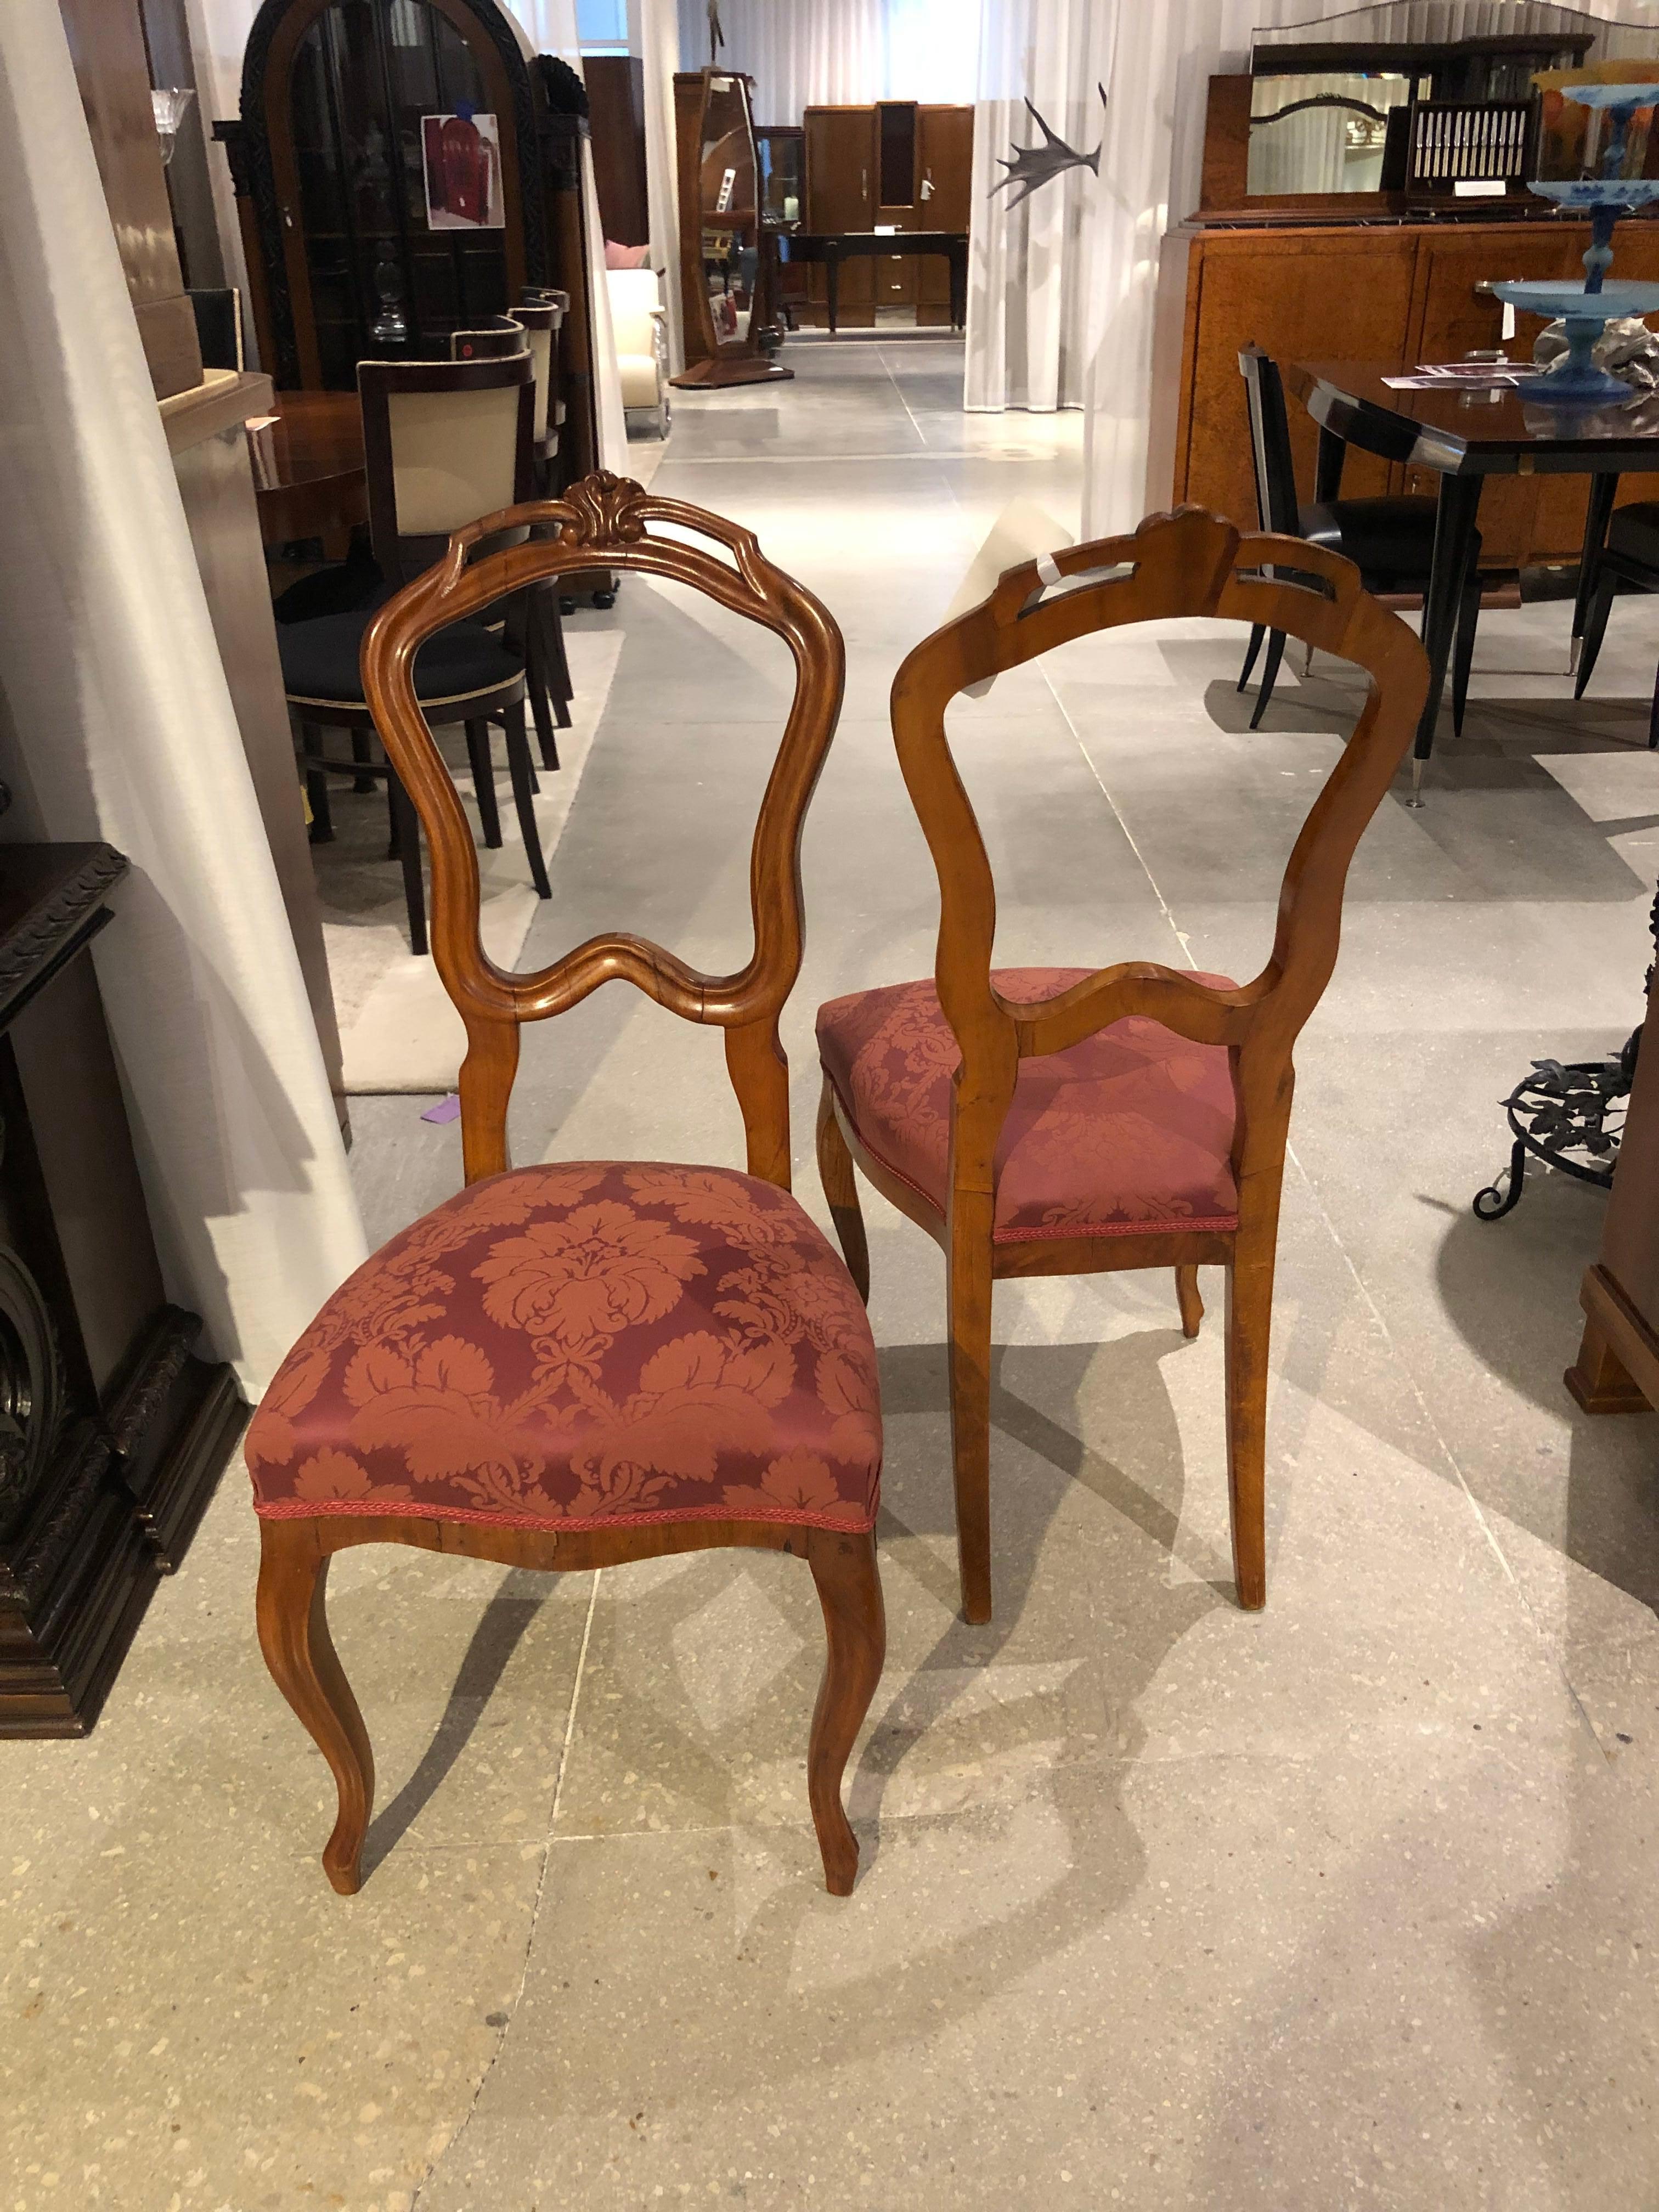 Pair of Biedermeier chairs; two female walnut chairs with rose colored upholstery.